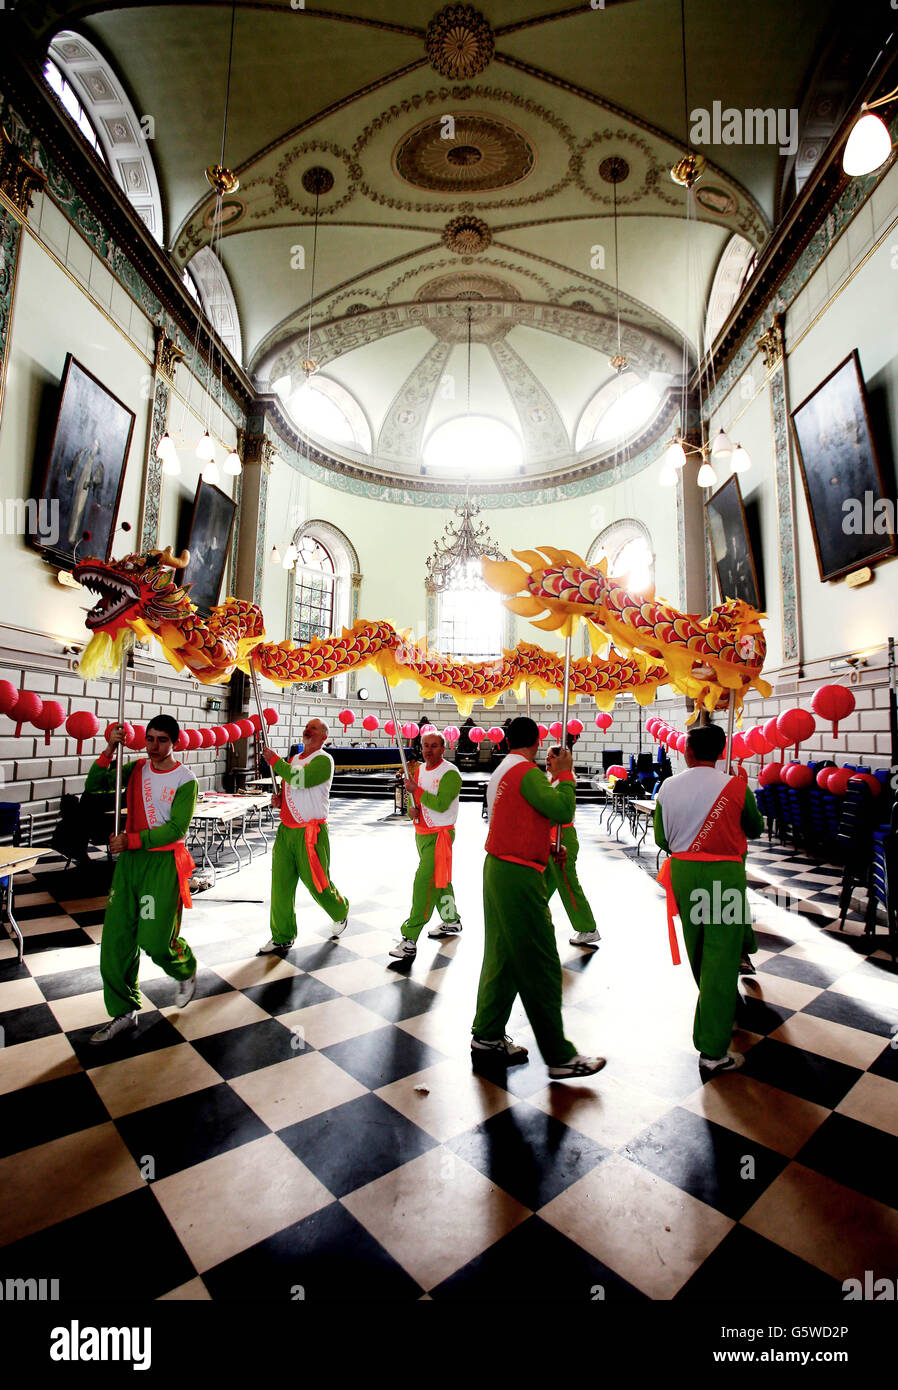 Yung Ling dance troupe practice their Chinese new year dragon dance in the exam hall before entertaining students at Trinity College in Dublin. Stock Photo